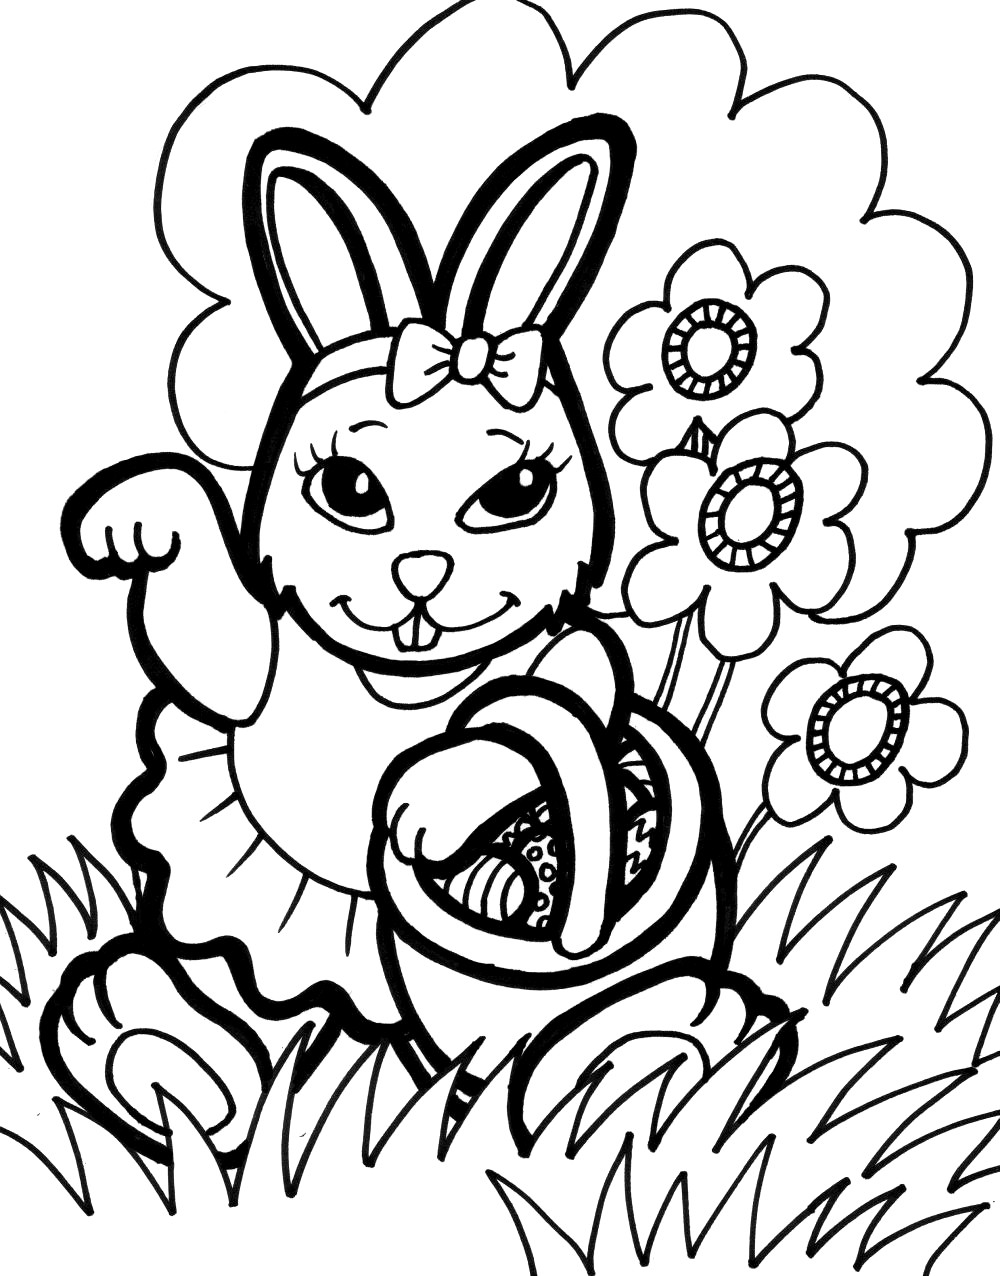 Free Coloring Sheets For Kids
 Bunny Coloring Pages Best Coloring Pages For Kids